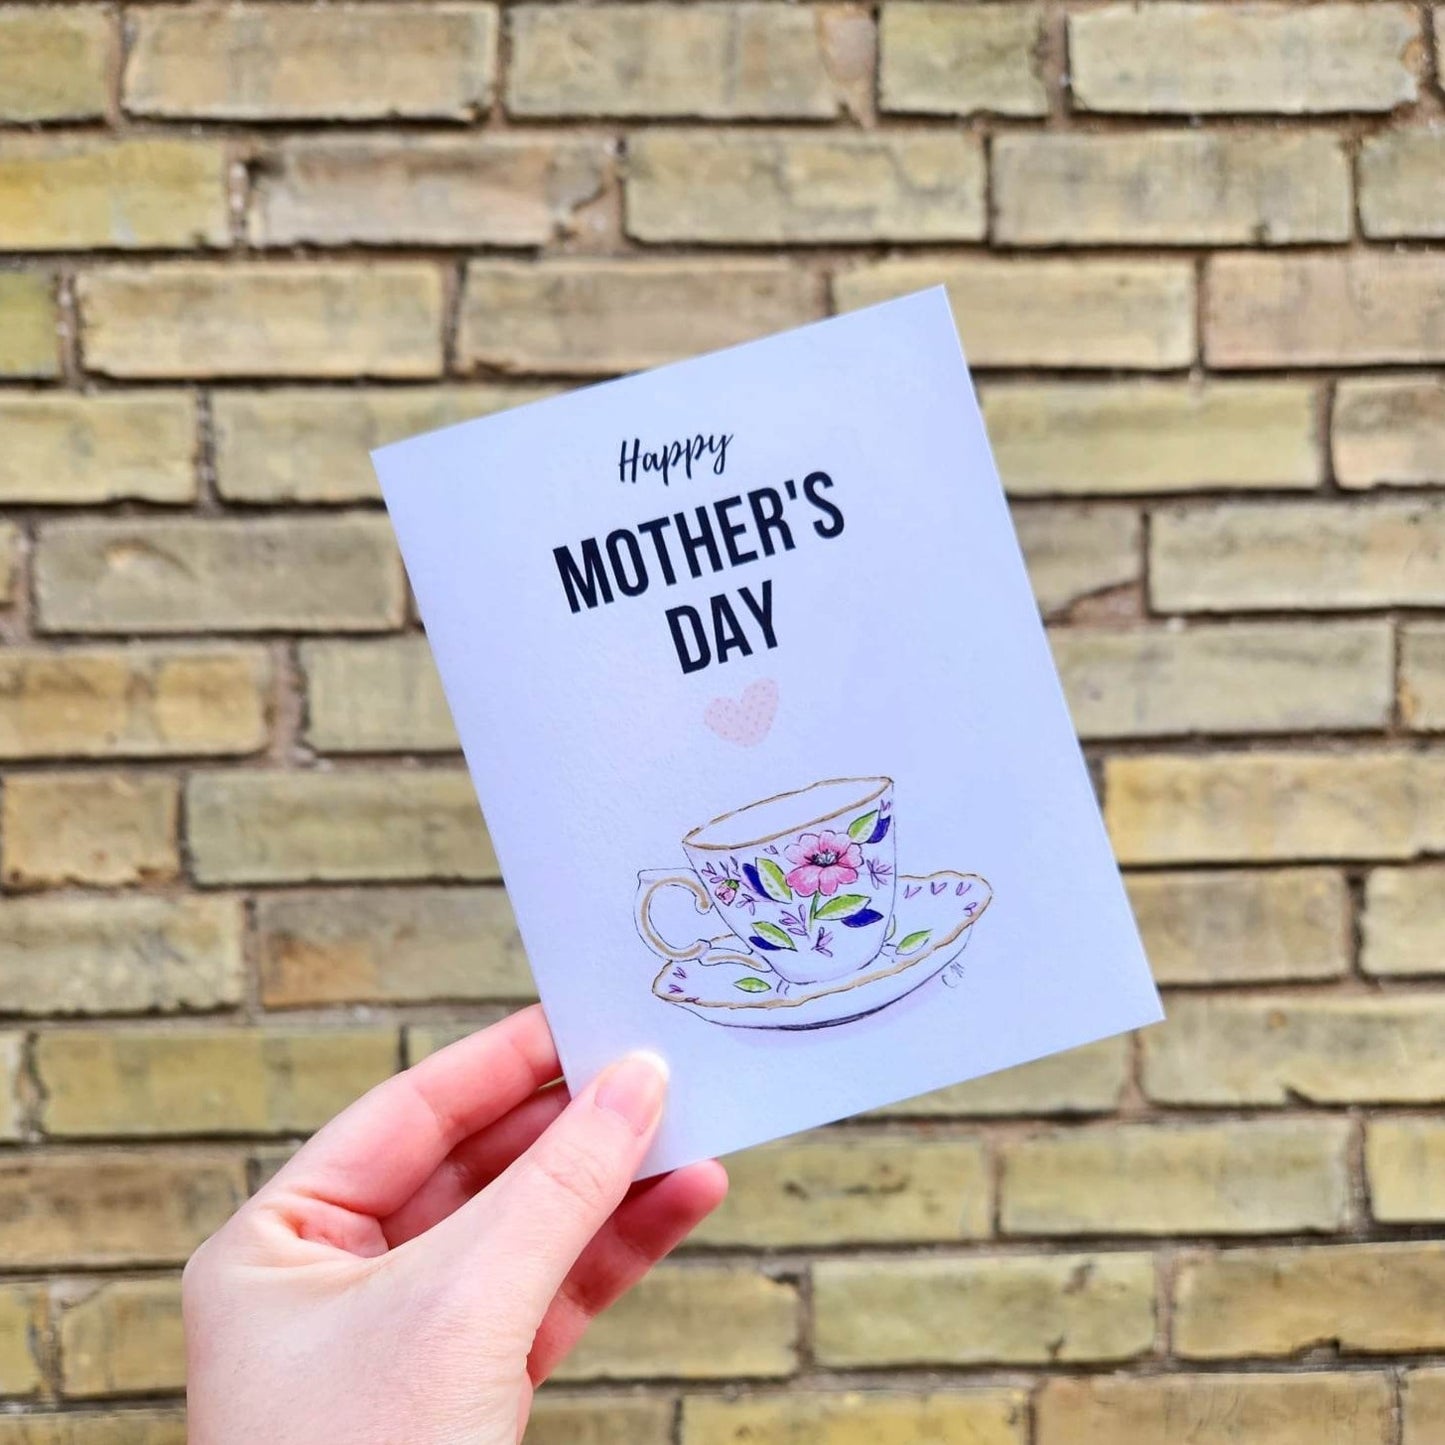 Tea lover mother's day card, Happy mother's day card, Floral tea cup card, Card for mom, Aunt, Sister, Pretty mother's day card for wife